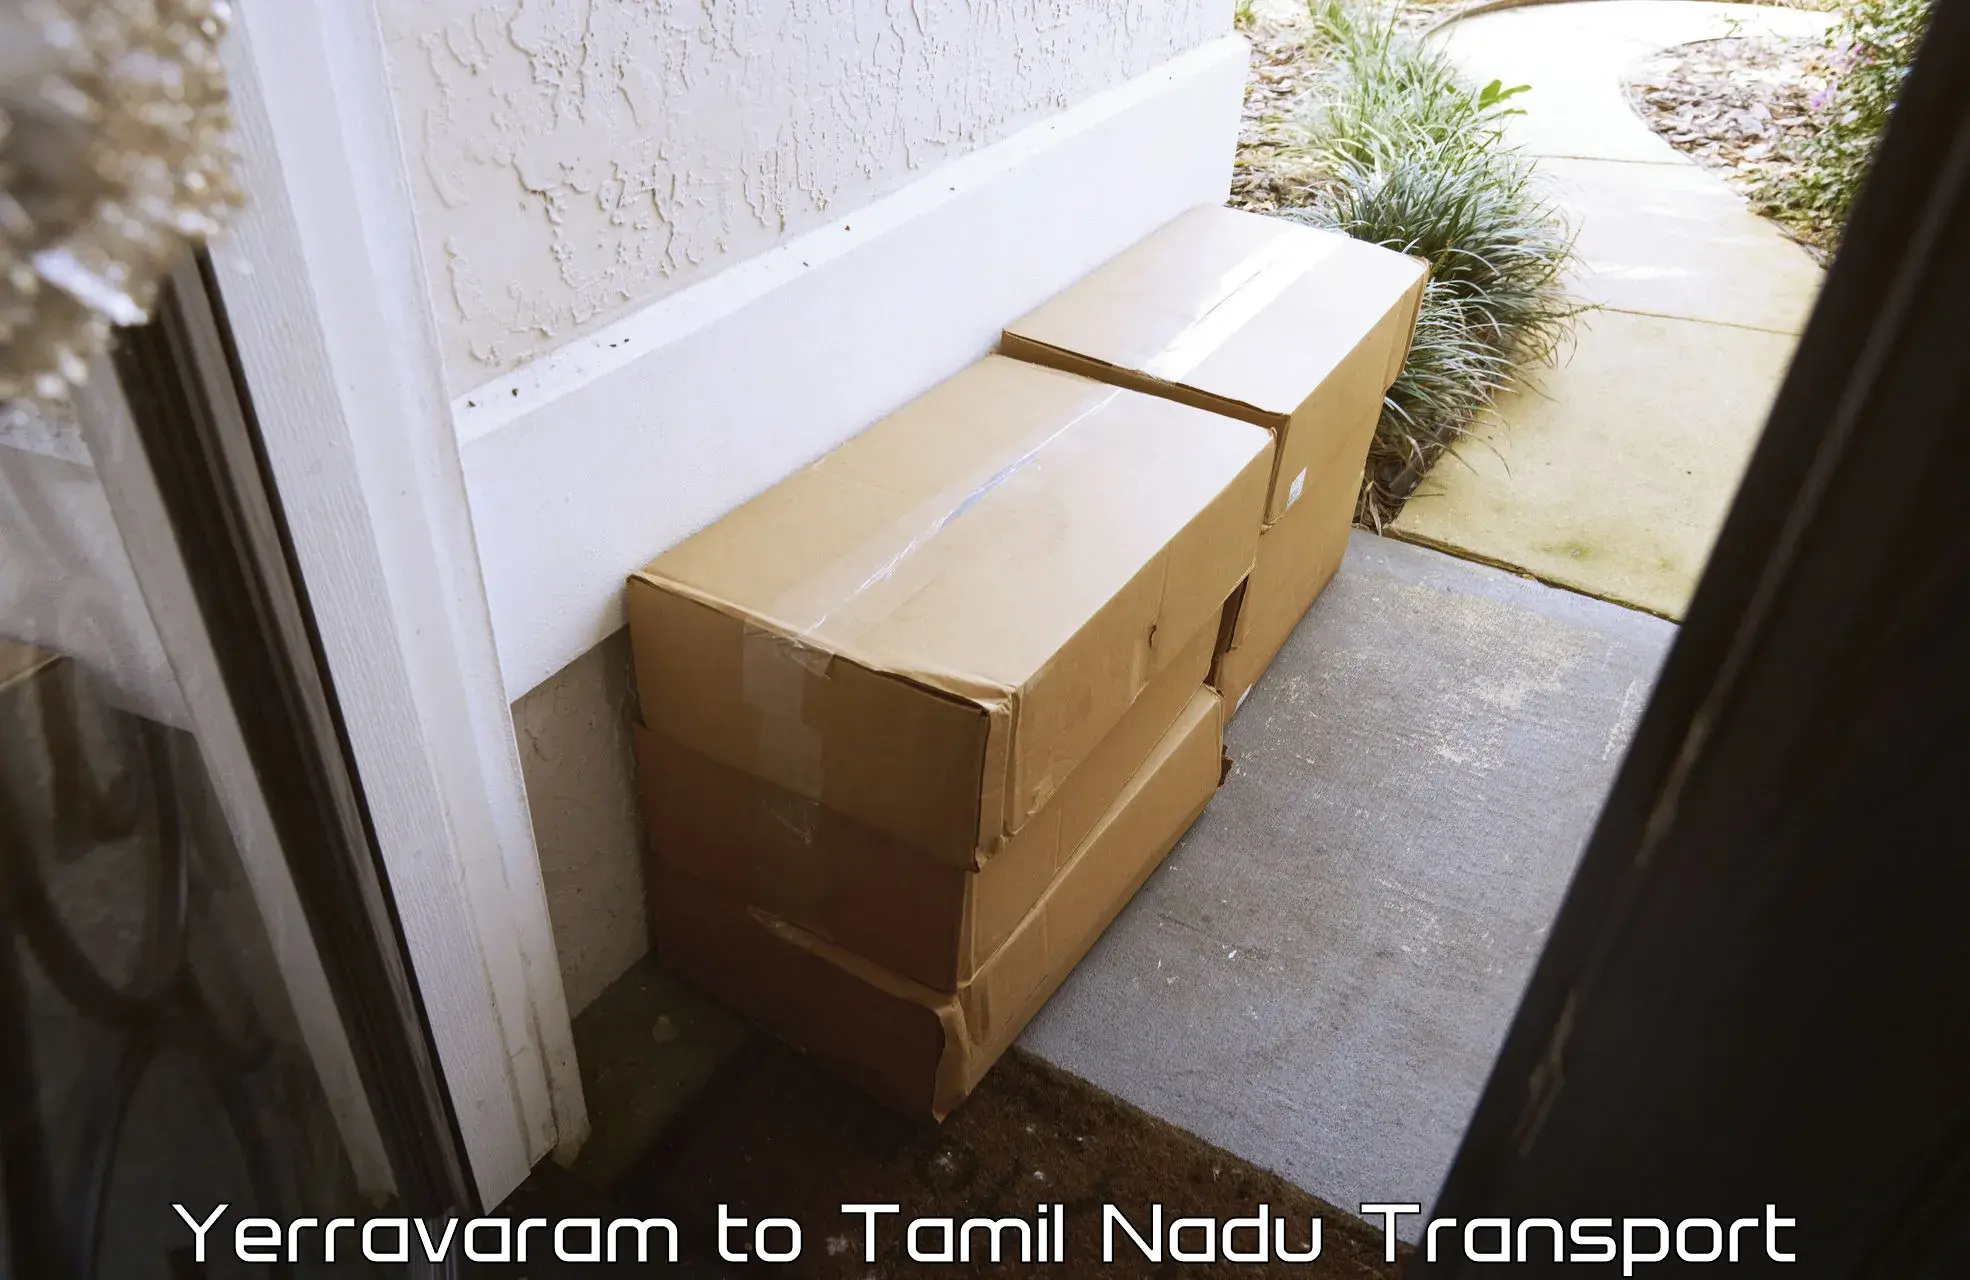 Part load transport service in India in Yerravaram to Ennore Port Chennai